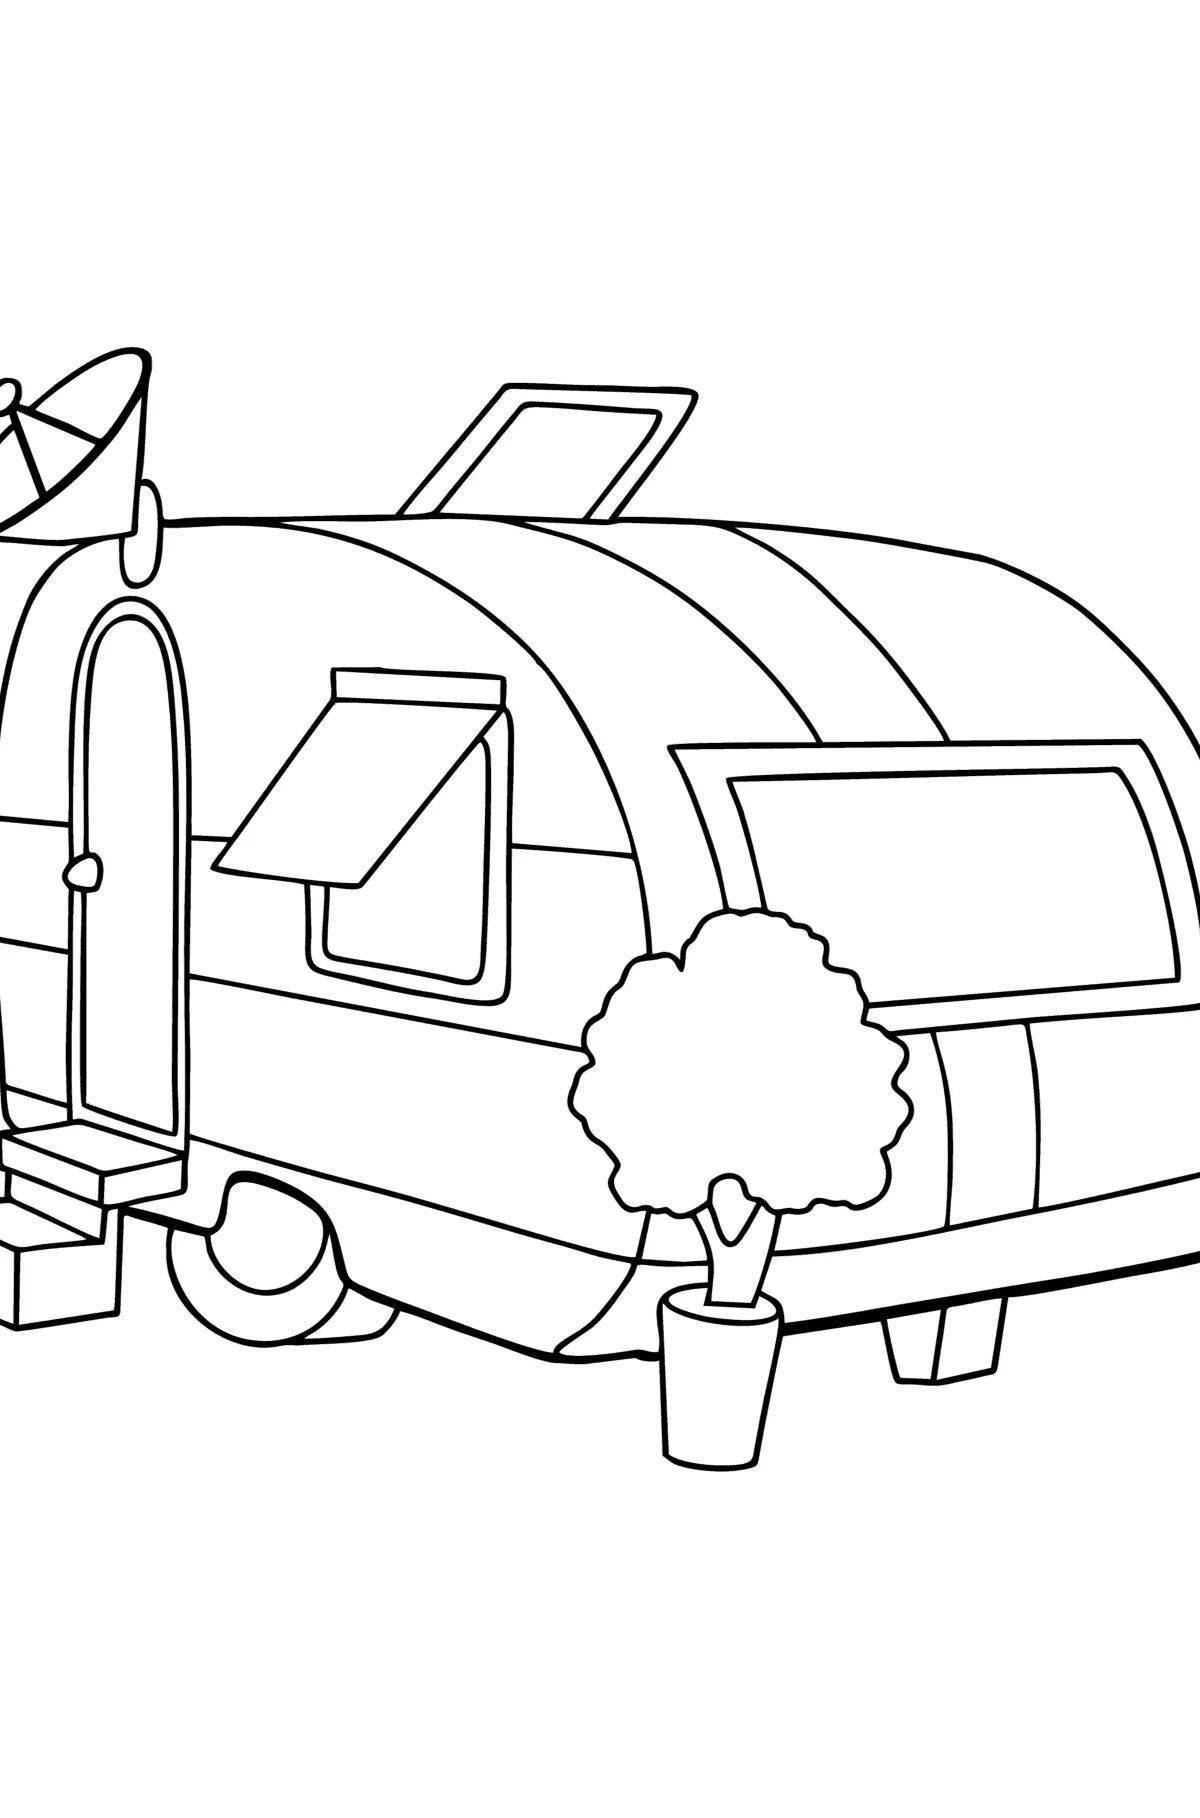 Shiny Mobile Home coloring book for kids